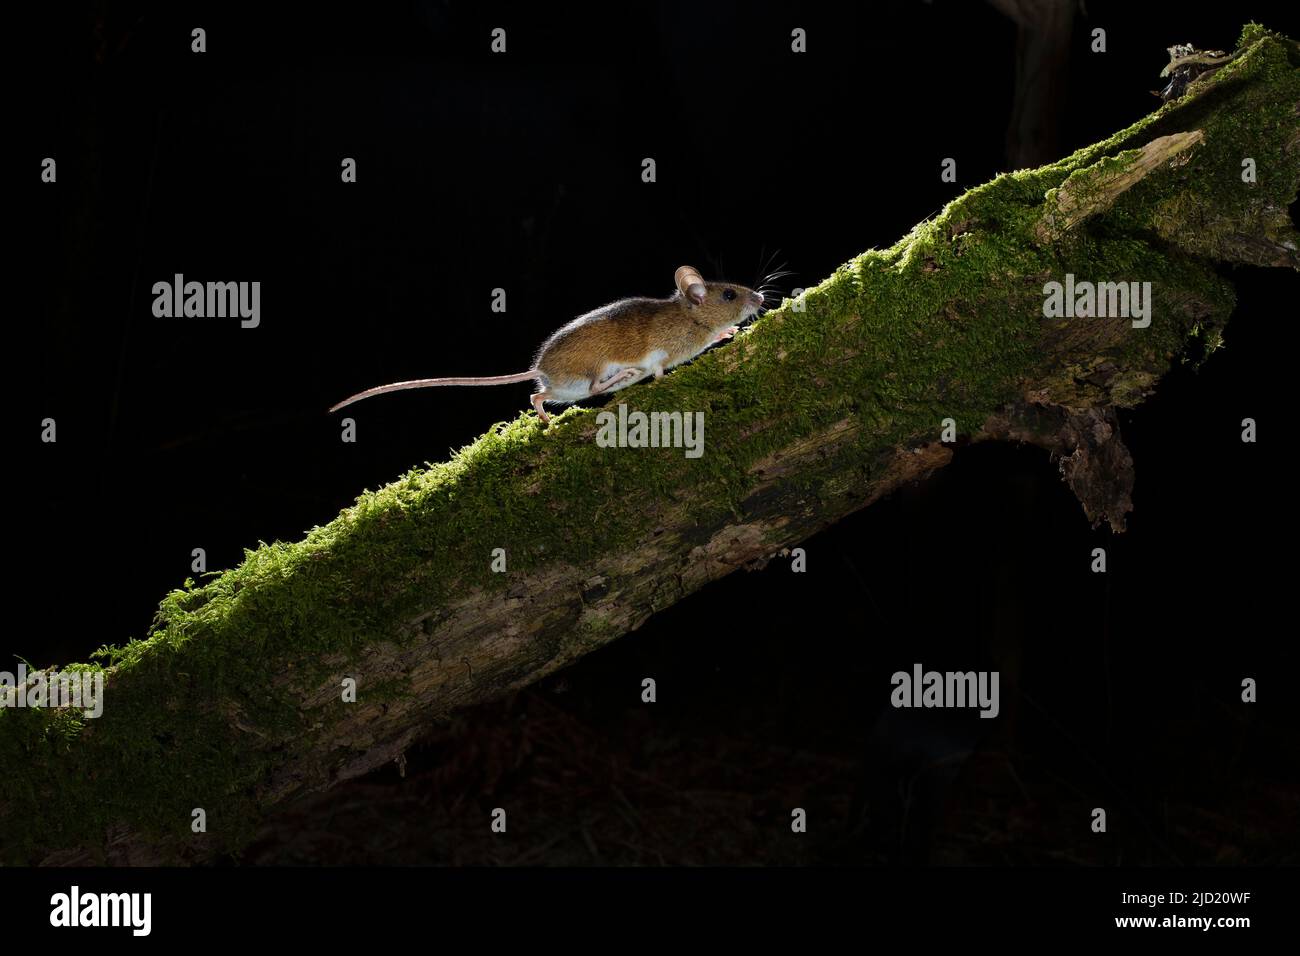 A Wood mouse Apodemus sylvaticus running up a branch in the woods at night Stock Photo